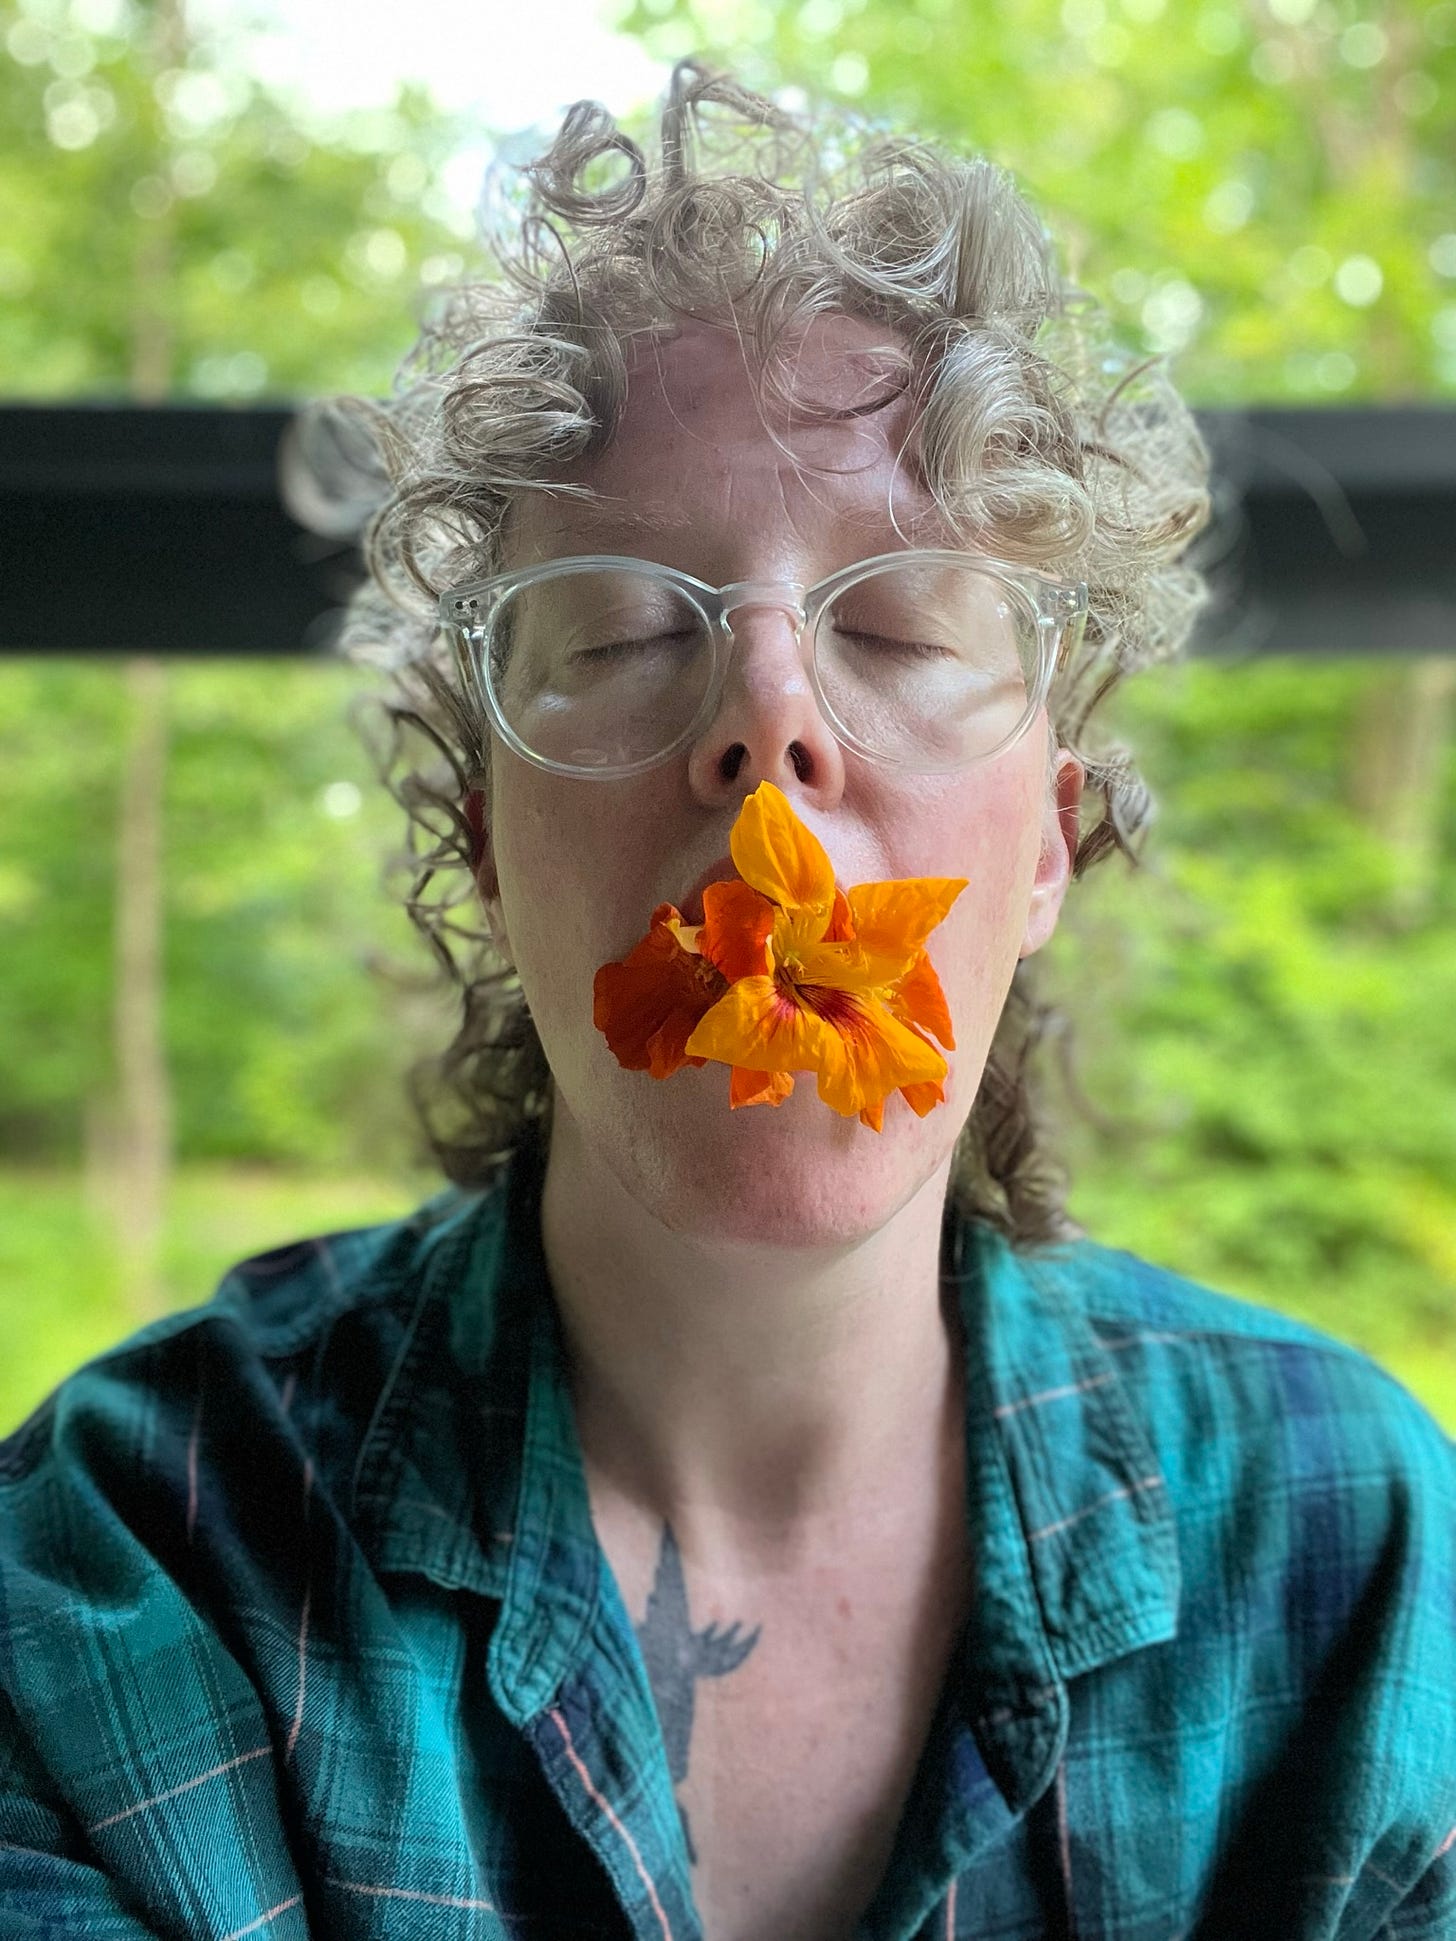 close portrait of a curly-haired, glasses-wearing person with their eyes closed, orange nasturtium blossoms coming out of their mouth